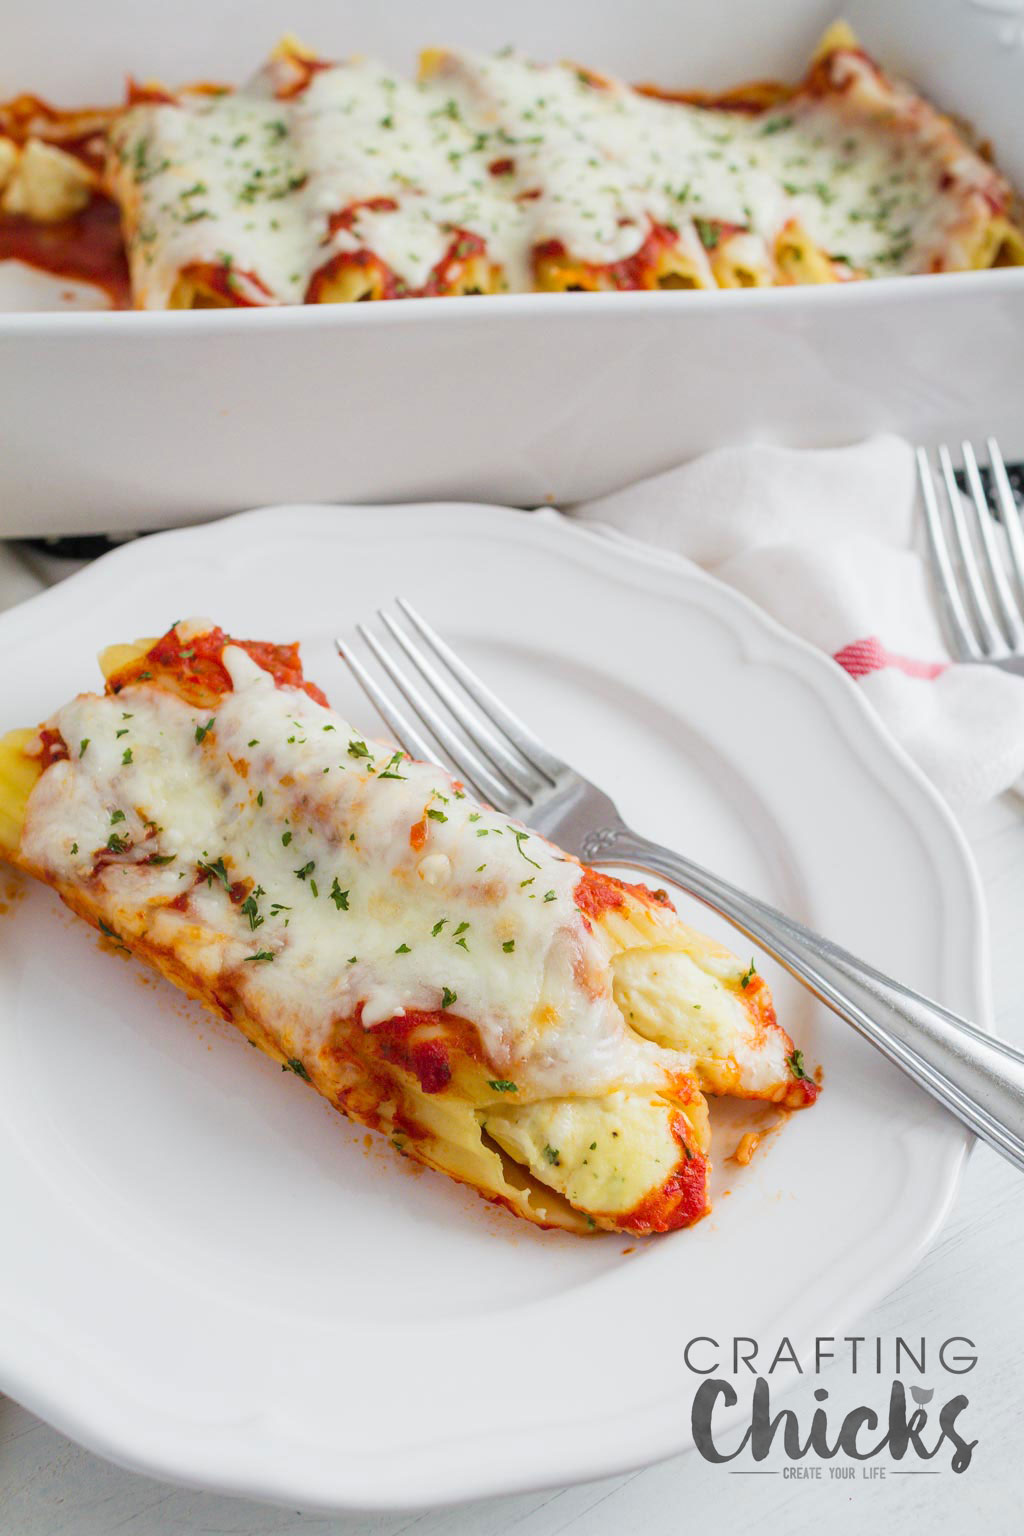 For a delicious and meatless meal, try this classic Manicotti recipe. It is sure to be a crowd pleaser.